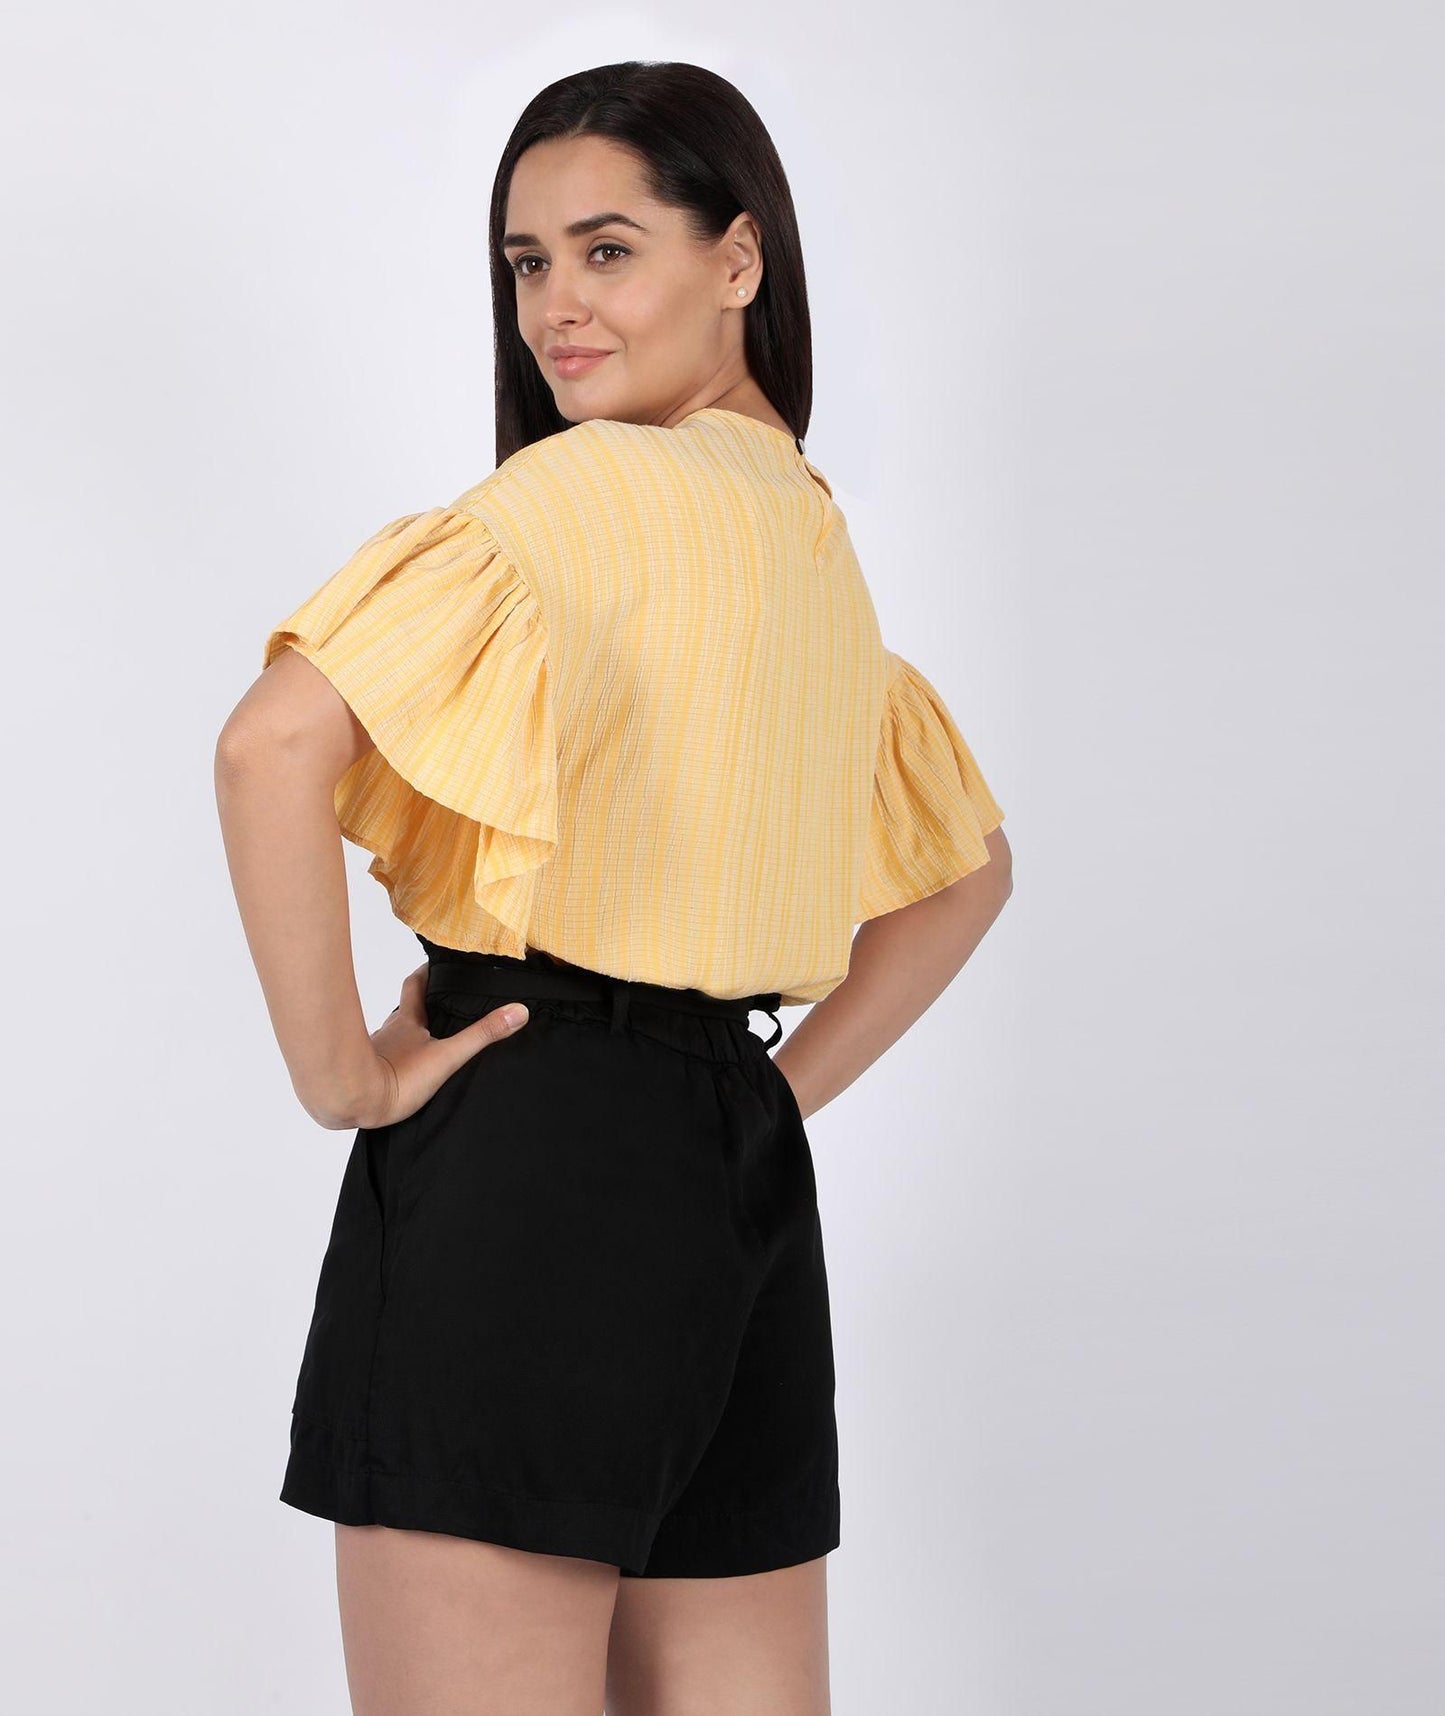 Flared Sleeve Striped Women's Yellow Top